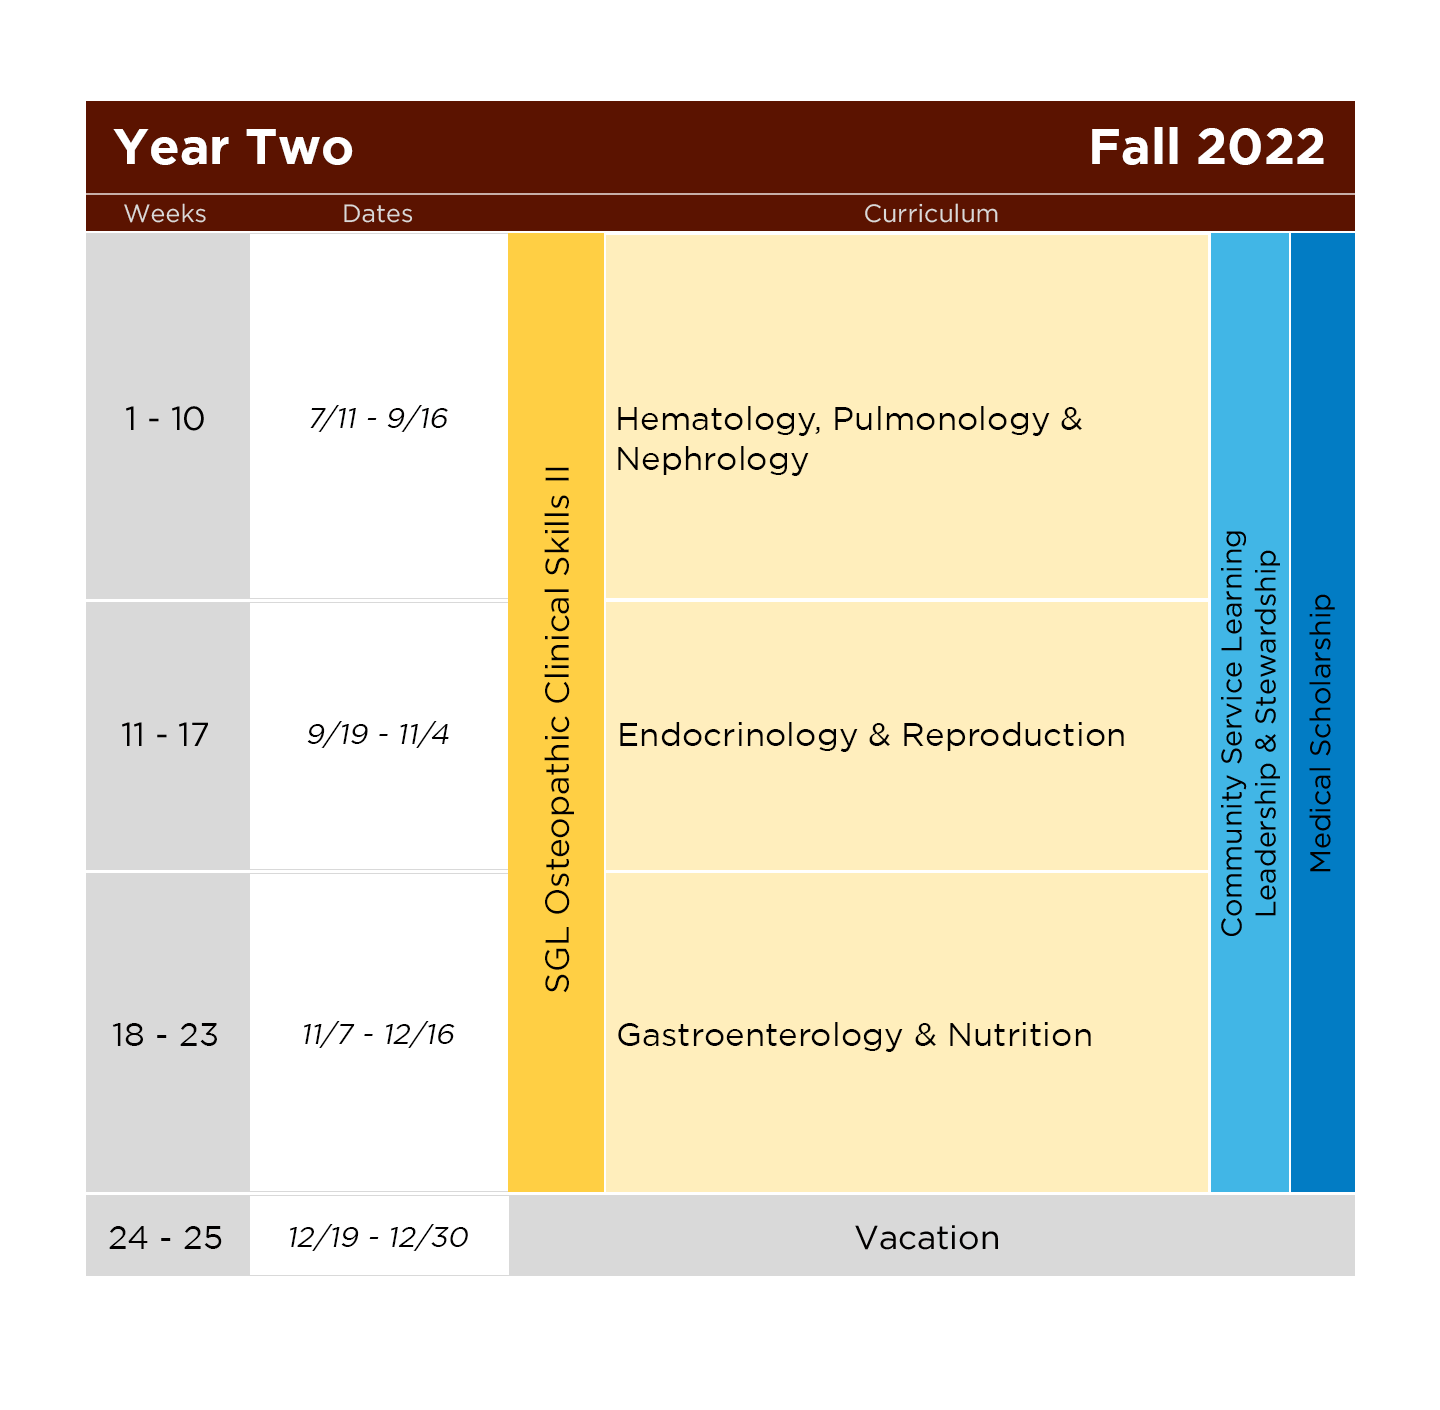 A sample schedule for Fall 2022 SGL Year Two